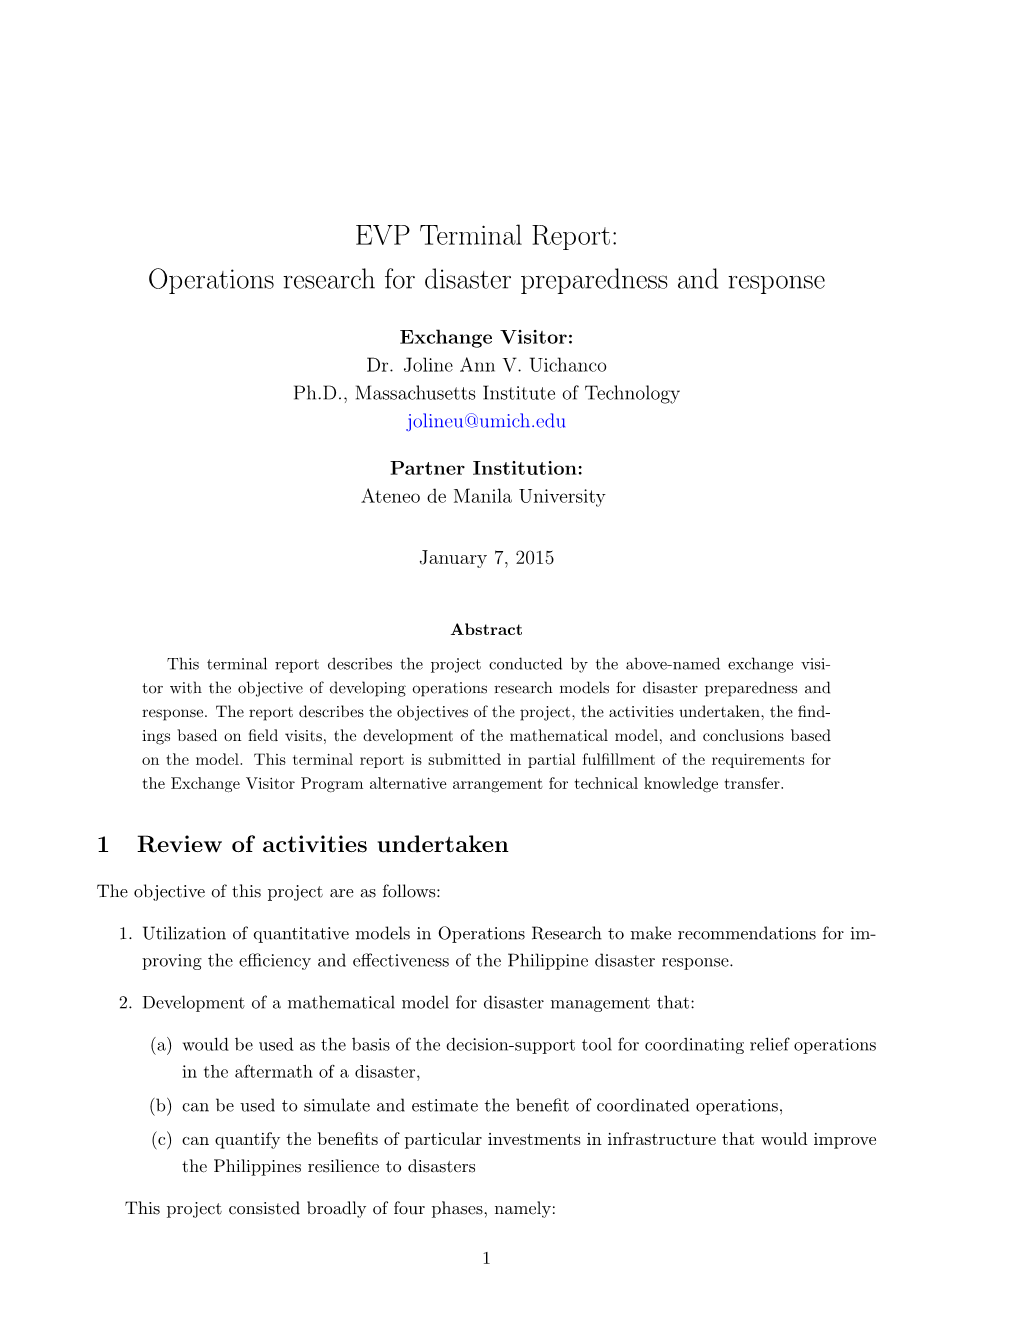 EVP Terminal Report: Operations Research for Disaster Preparedness and Response